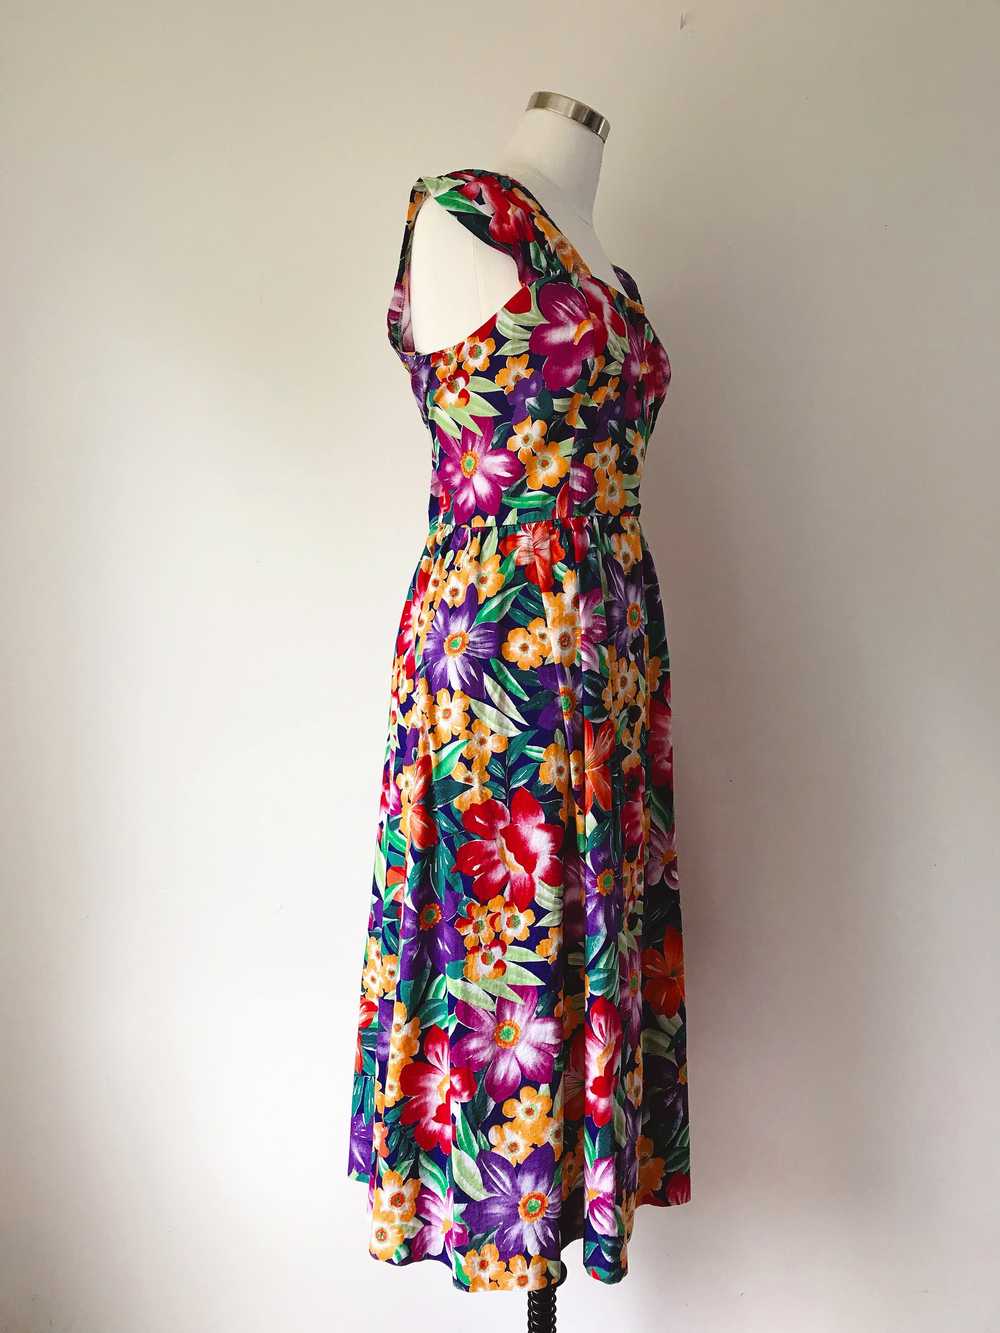 1990s Bright Floral Dress - image 3